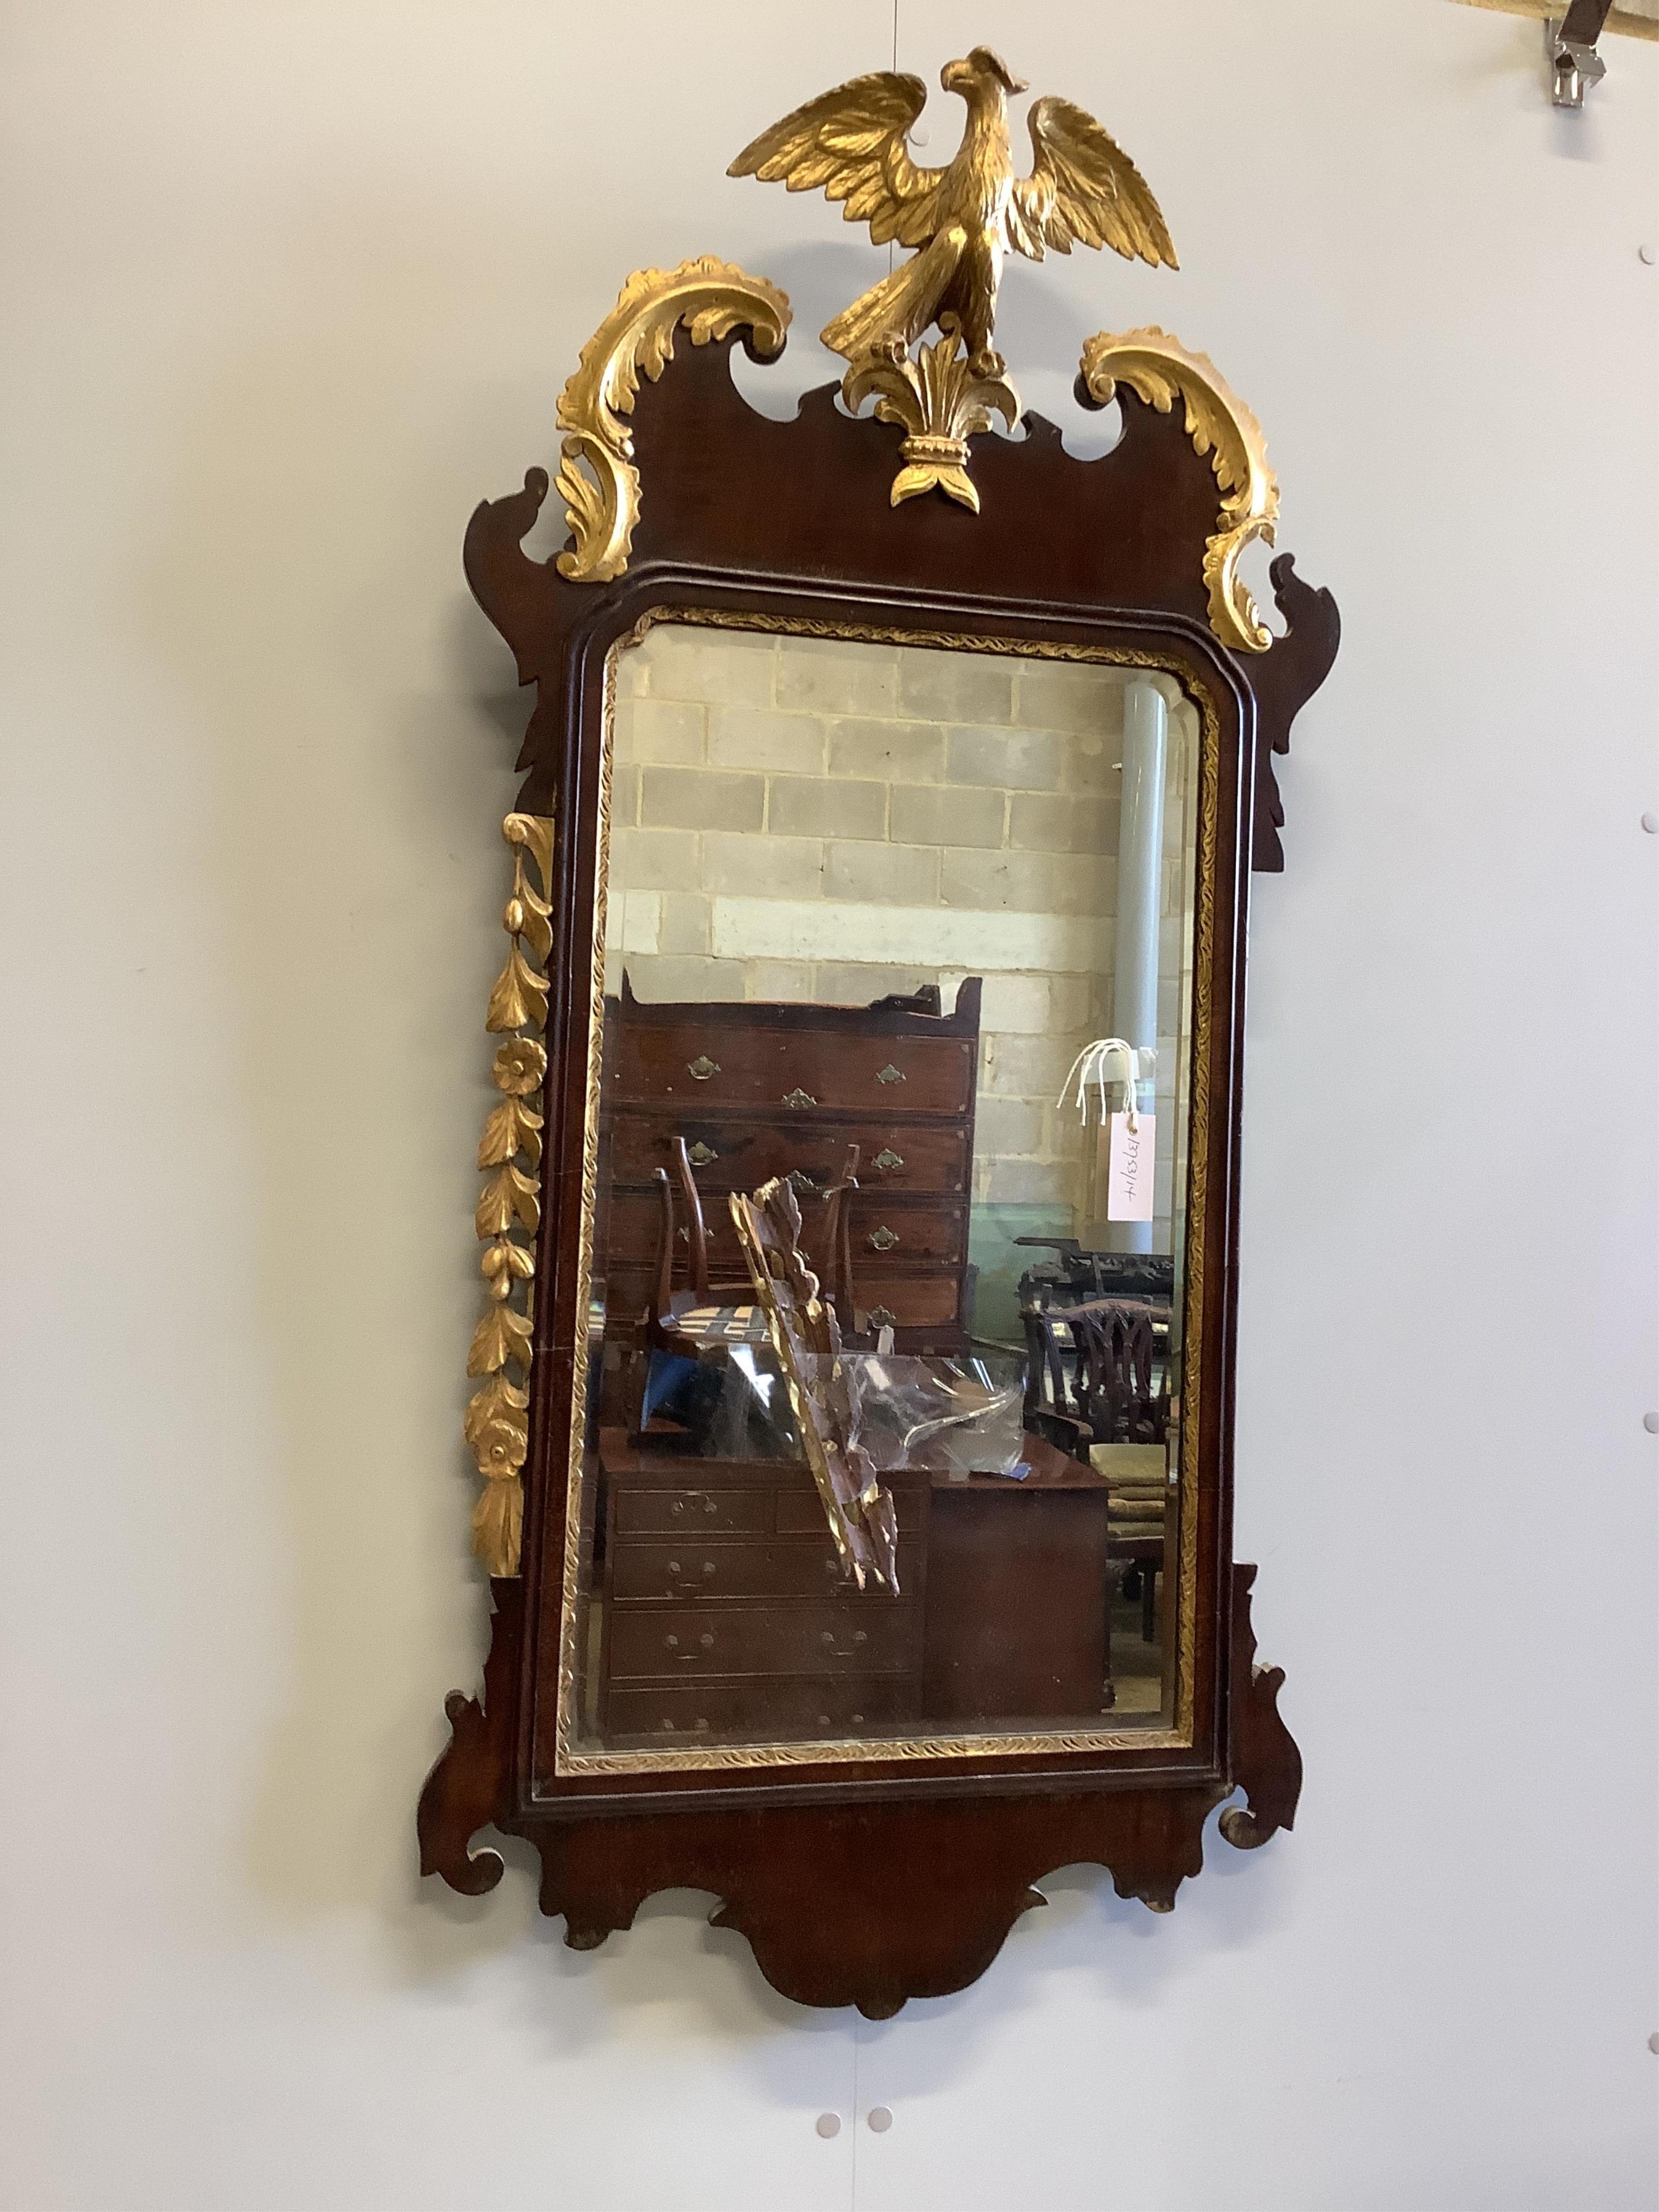 An early 19th century Chippendale design mahogany and parcel gilt fret carved pier glass, having carved eagle surmount between twin scrolled pediment and with foliage carved mount, width 57cm, height 120cm               